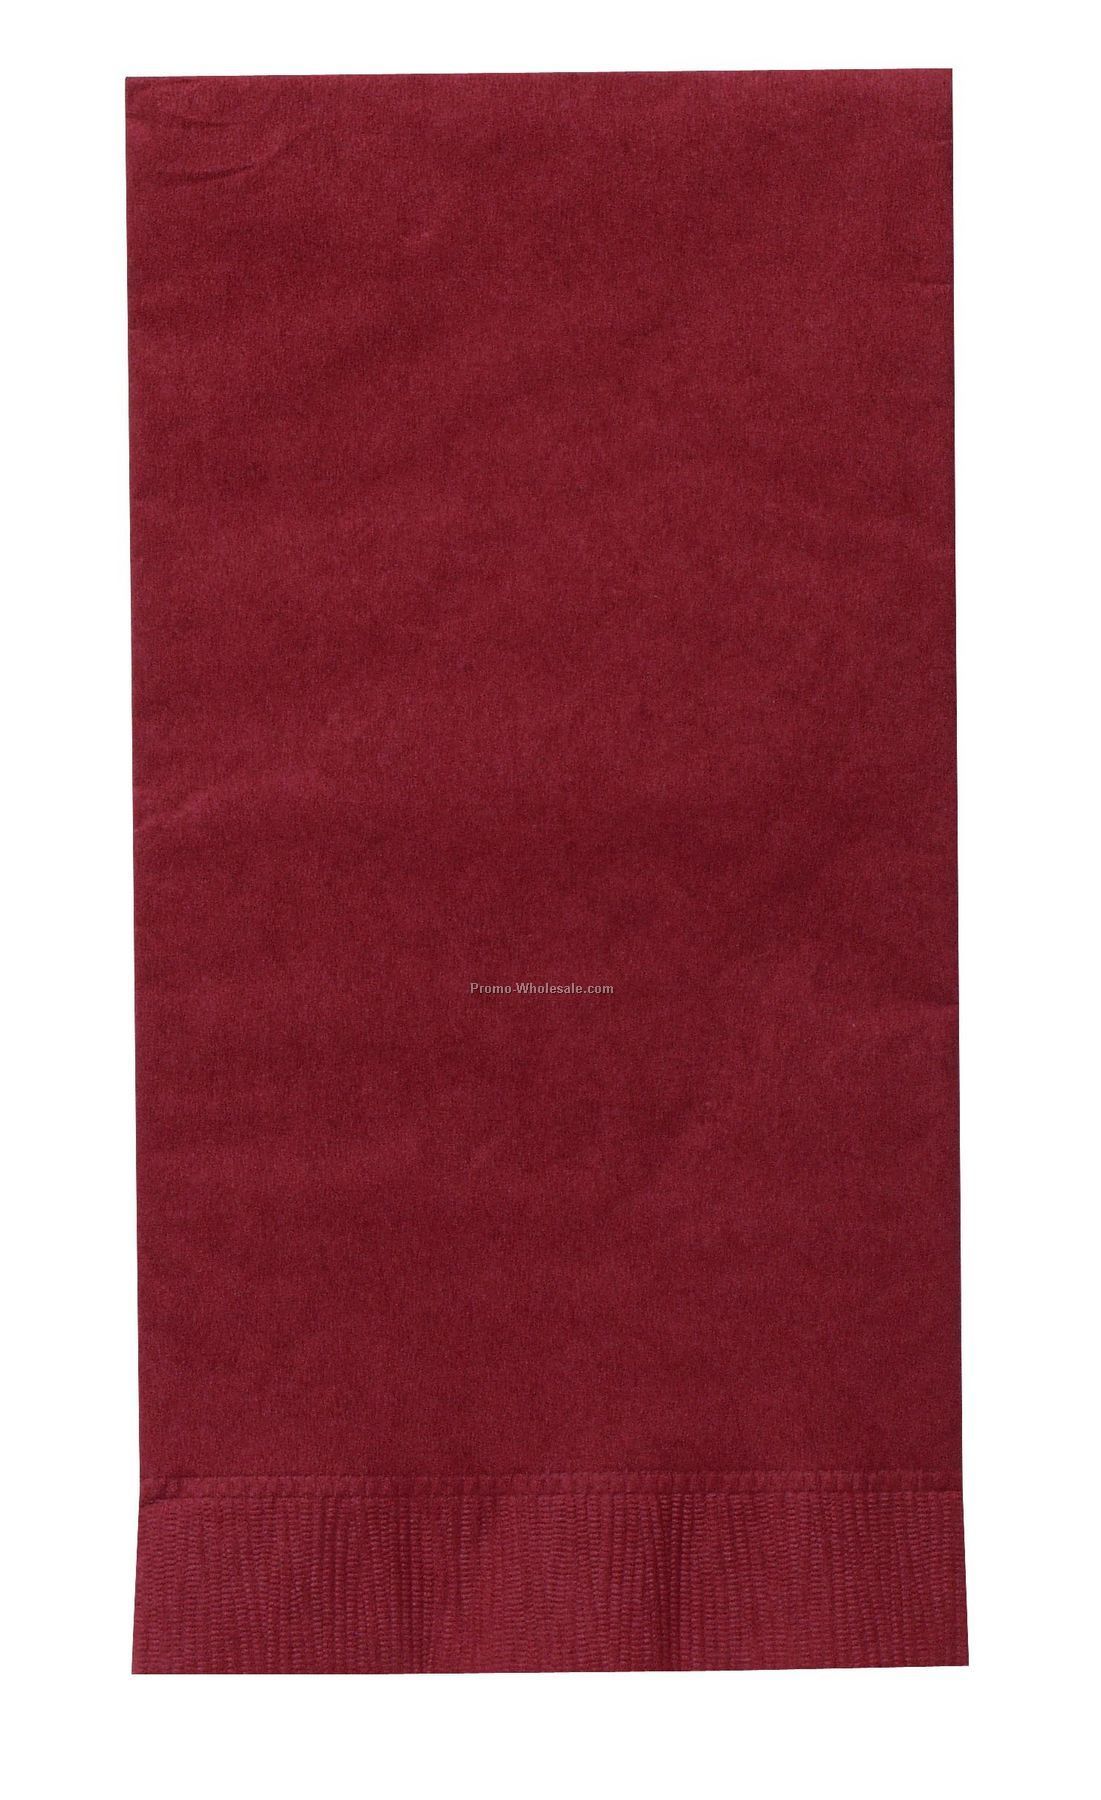 The 500 Line Colorware Burgundy Royale Red Dinner Napkins W/ 1/8 Fold